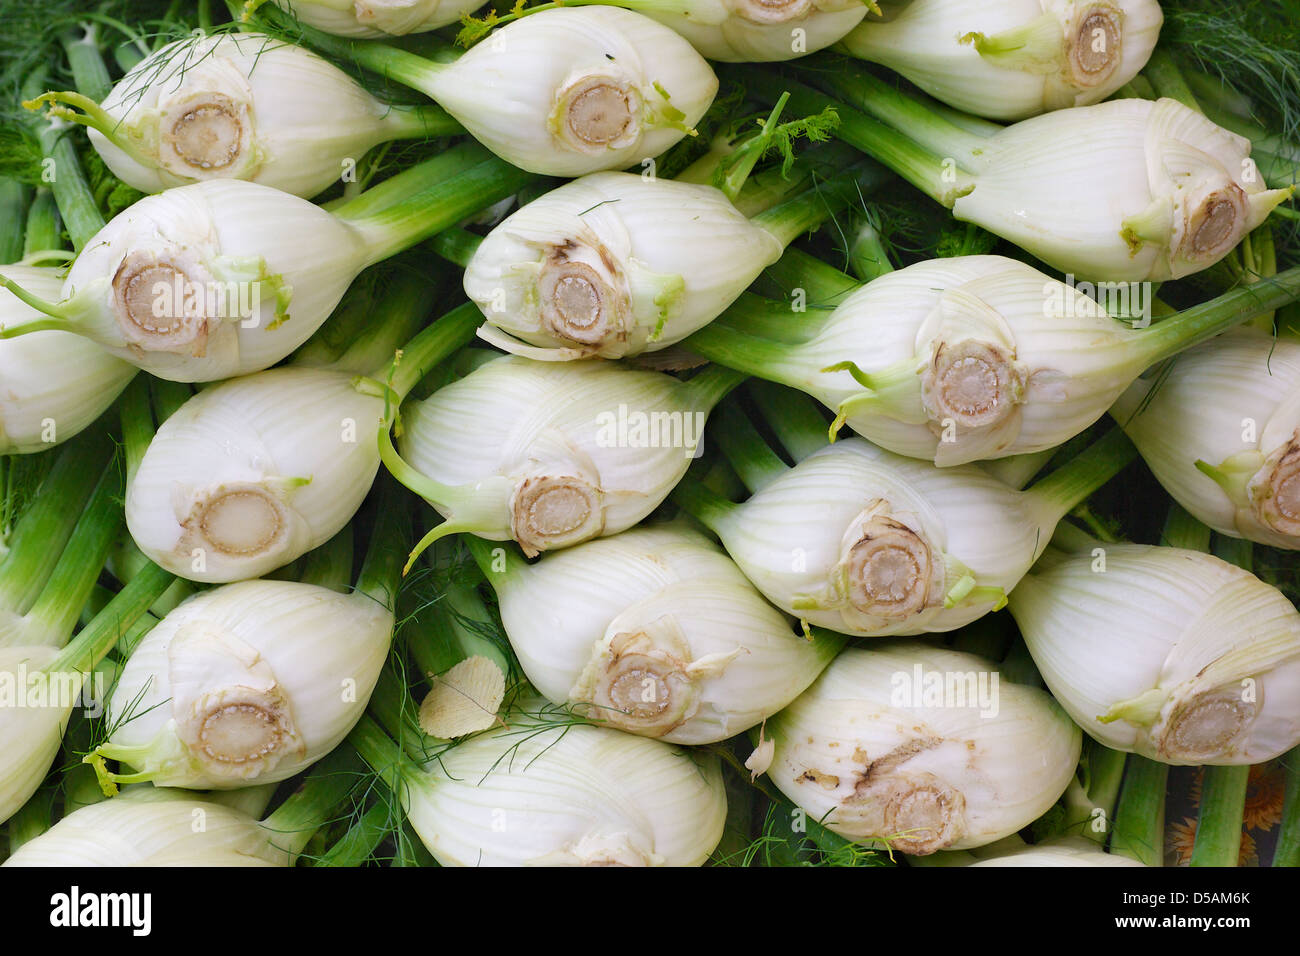 Pile of Fennel at the farmers market Stock Photo